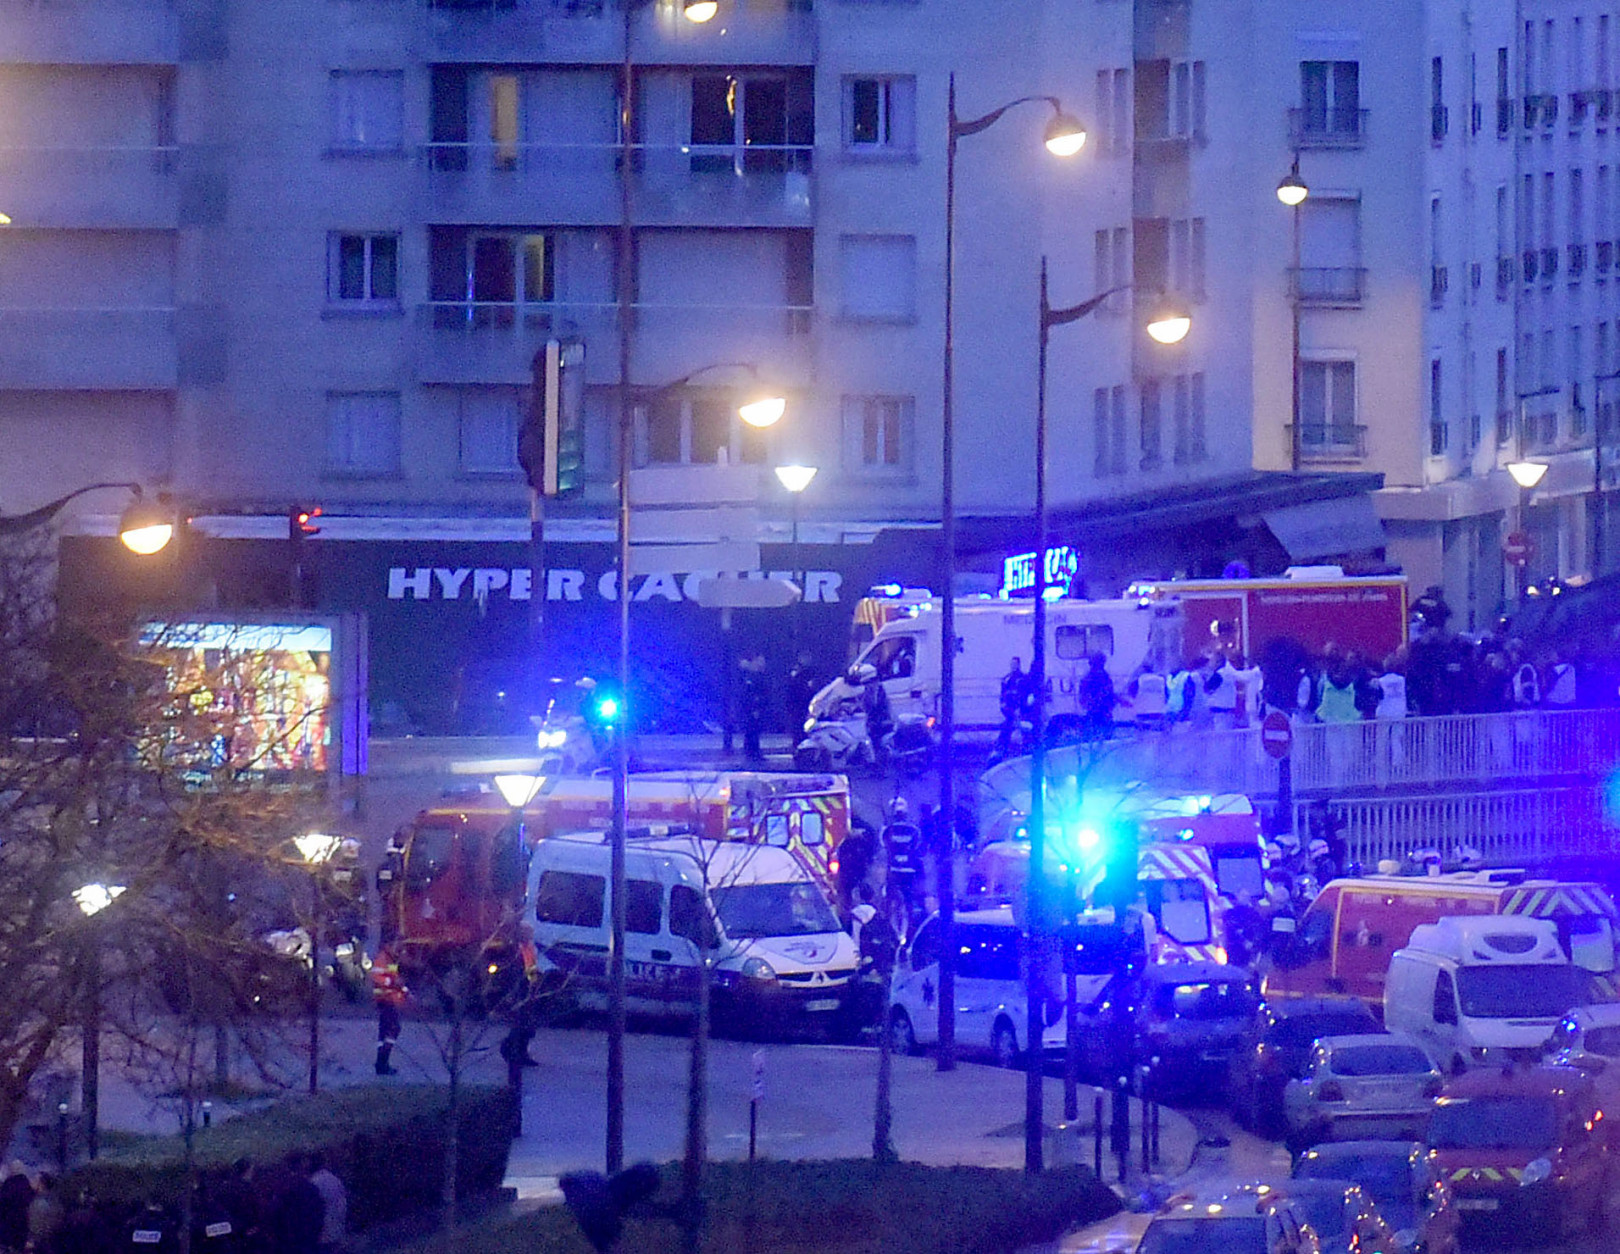  French firemen and emergency doctors enter a kosher deli during a hostage situation at Port de Vincennes on January 9, 2015 in Paris, France. According to reports at least five people were taken hostage in a kosher deli in the Port de Vincennes area of Paris. A huge manhunt for the two suspected gunmen in Wednesday's deadly attack on Charlie Hebdo magazine has entered its third day. (Photo by Antoine Antoniol/Getty Images)